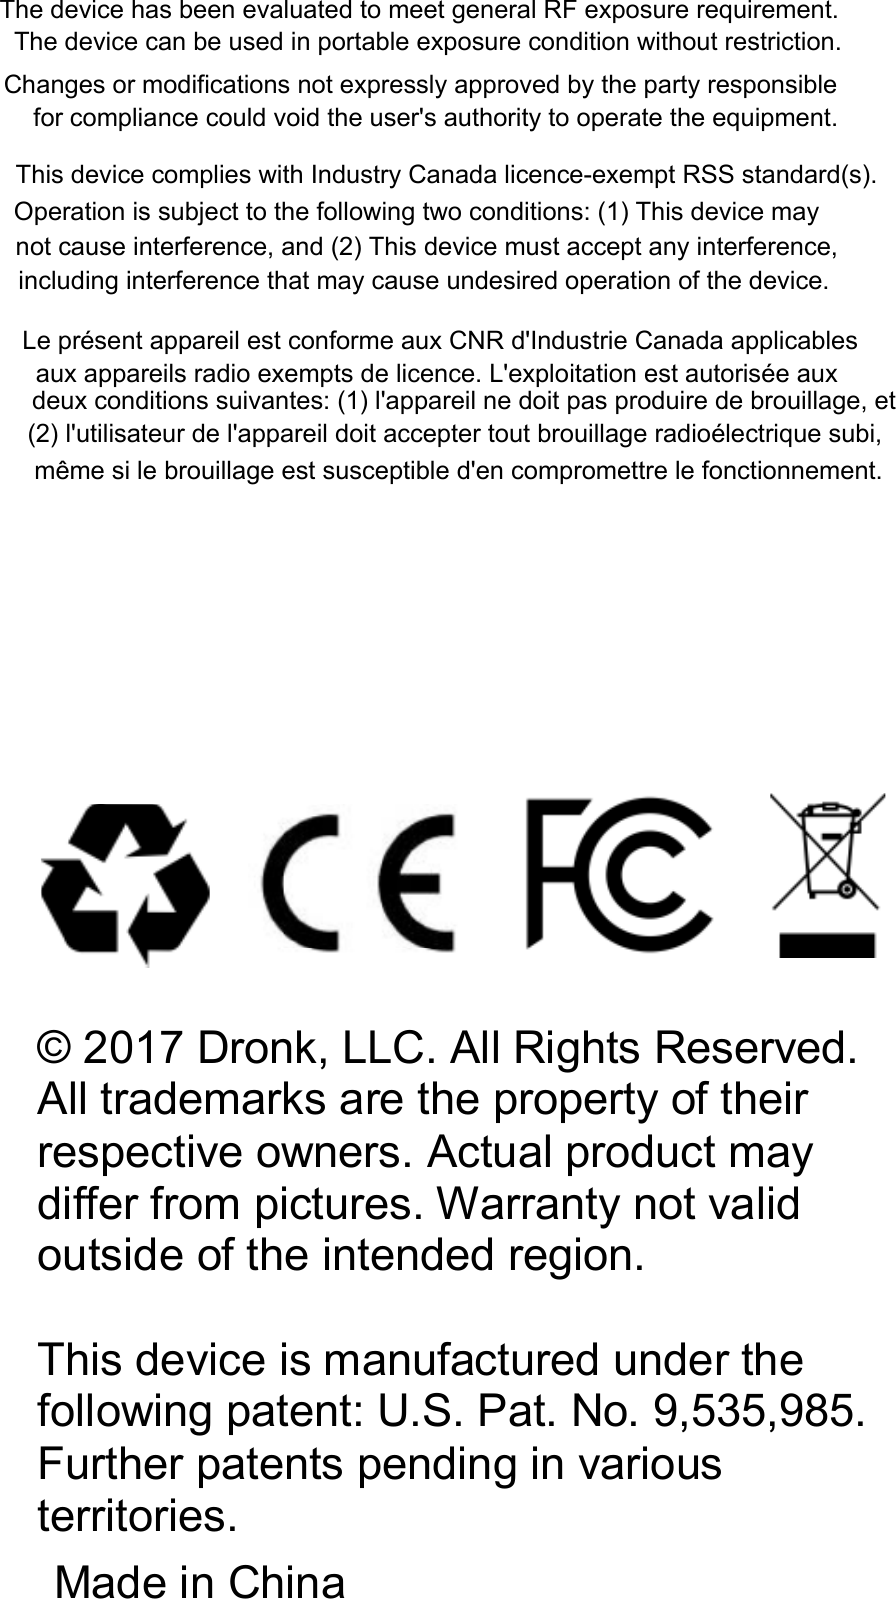 © 2017 Dronk, LLC. All Rights Reserved. All trademarks are the property of their respective owners. Actual product may differ from pictures. Warranty not valid outside of the intended region.This device ismanufactured under the following patent: U.S. Pat. No. 9,535,985. Further patents pending in various territories.Made in ChinaThe device has been evaluated to meet general RF exposure requirement.The device can be used in portable exposure condition without restriction.Changes or modifications not expressly approved by the party responsible for compliance could void the user&apos;s authority to operate the equipment.This device complies with Industry Canada licence-exempt RSS standard(s). Operation is subject to the following two conditions: (1) This device maynot cause interference, and (2) This device must accept any interference,including interference that may cause undesired operation of the device.Le présent appareil est conforme aux CNR d&apos;Industrie Canada applicables aux appareils radio exempts de licence. L&apos;exploitation est autorisée auxdeux conditions suivantes: (1) l&apos;appareil ne doit pas produire de brouillage, et (2) l&apos;utilisateur de l&apos;appareil doit accepter tout brouillage radioélectrique subi,même si le brouillage est susceptible d&apos;en compromettre le fonctionnement.